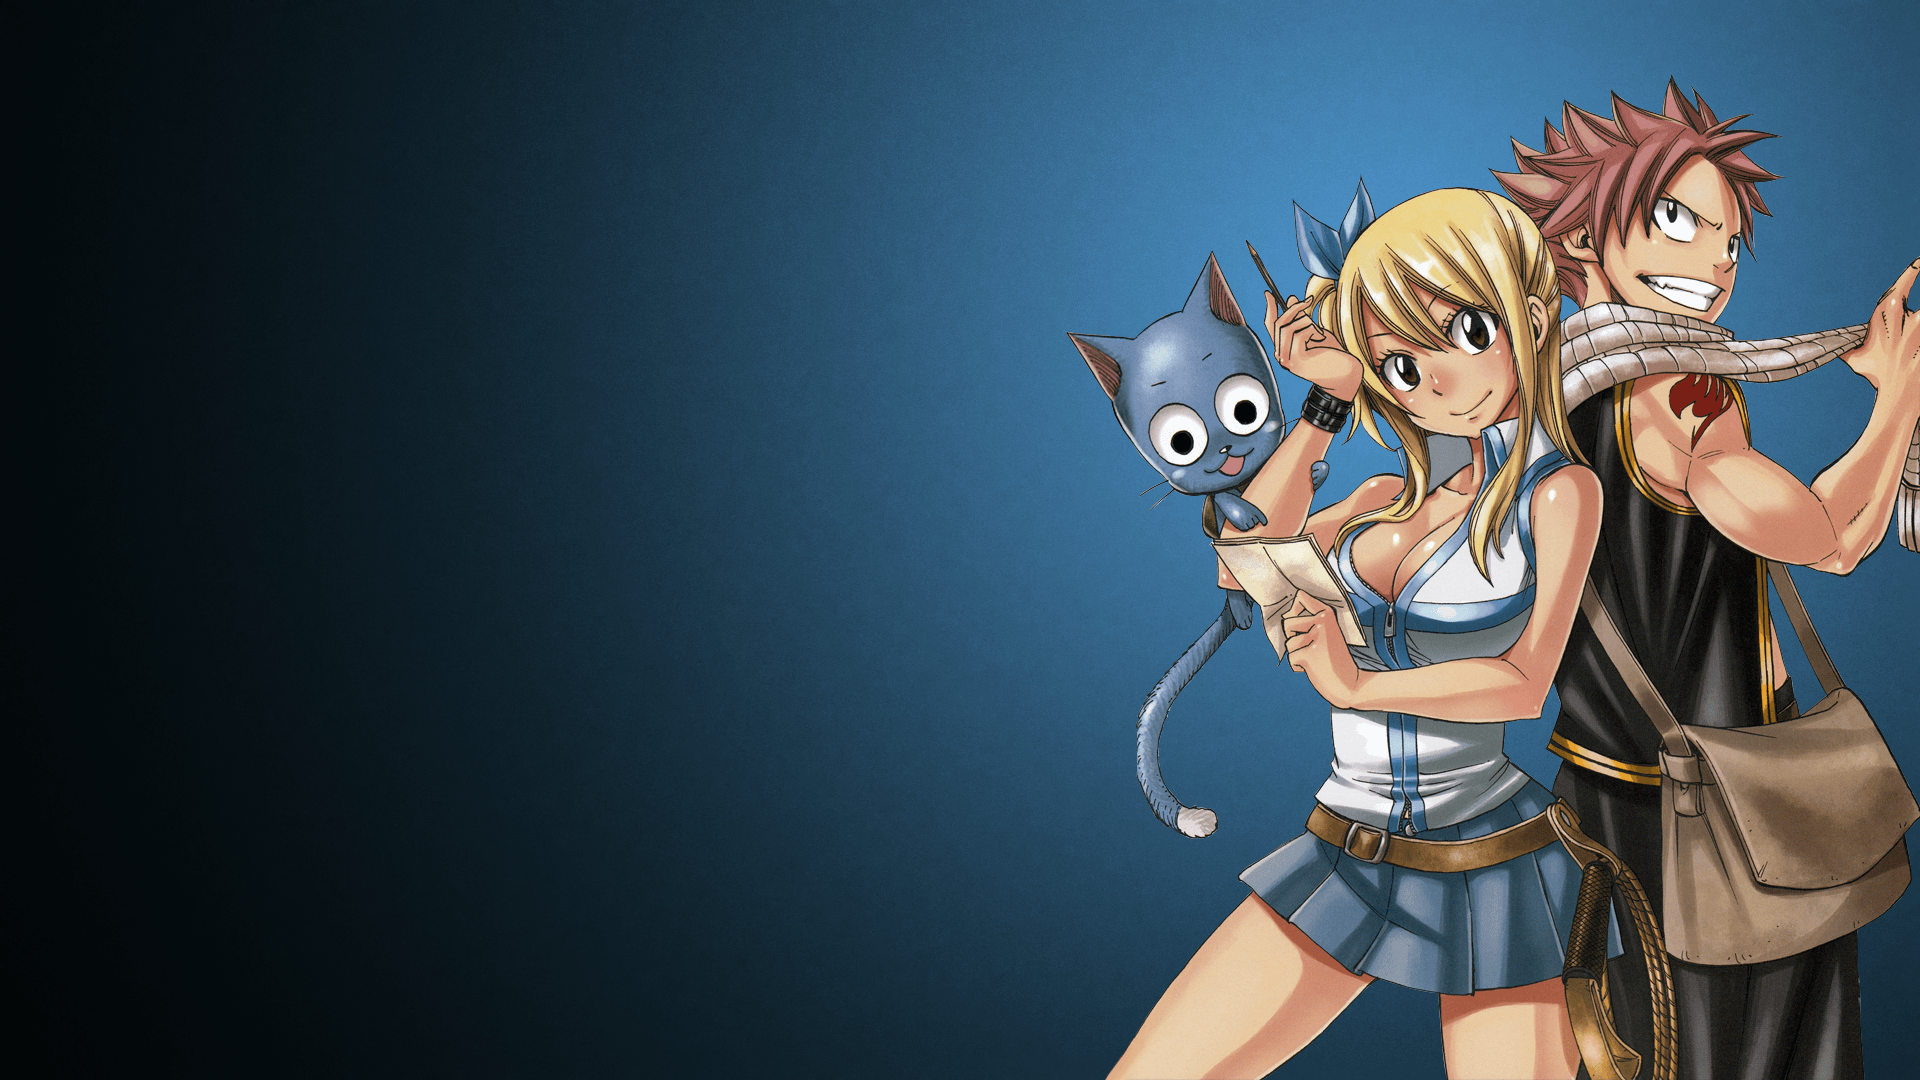 Fairy Tail Lucy Wallpapers Top Free Fairy Tail Lucy Backgrounds Wallpaperaccess